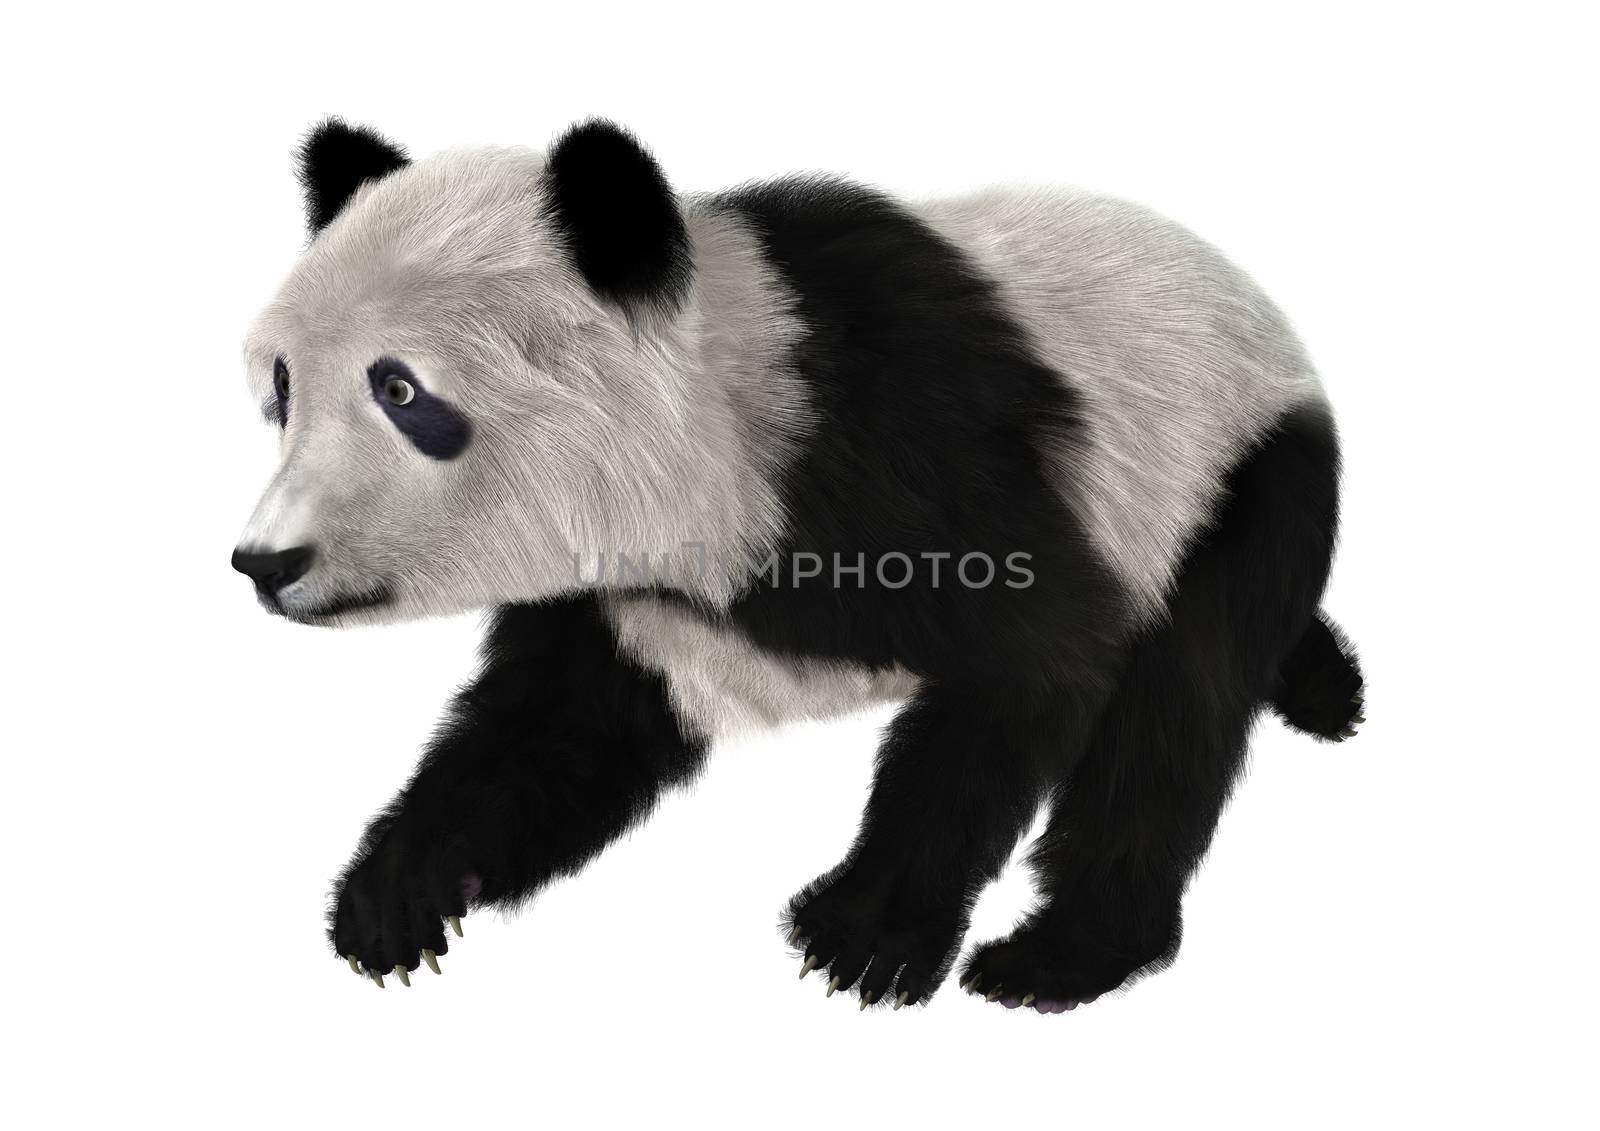 3D digital render of a cute panda bear cub isolated on white background